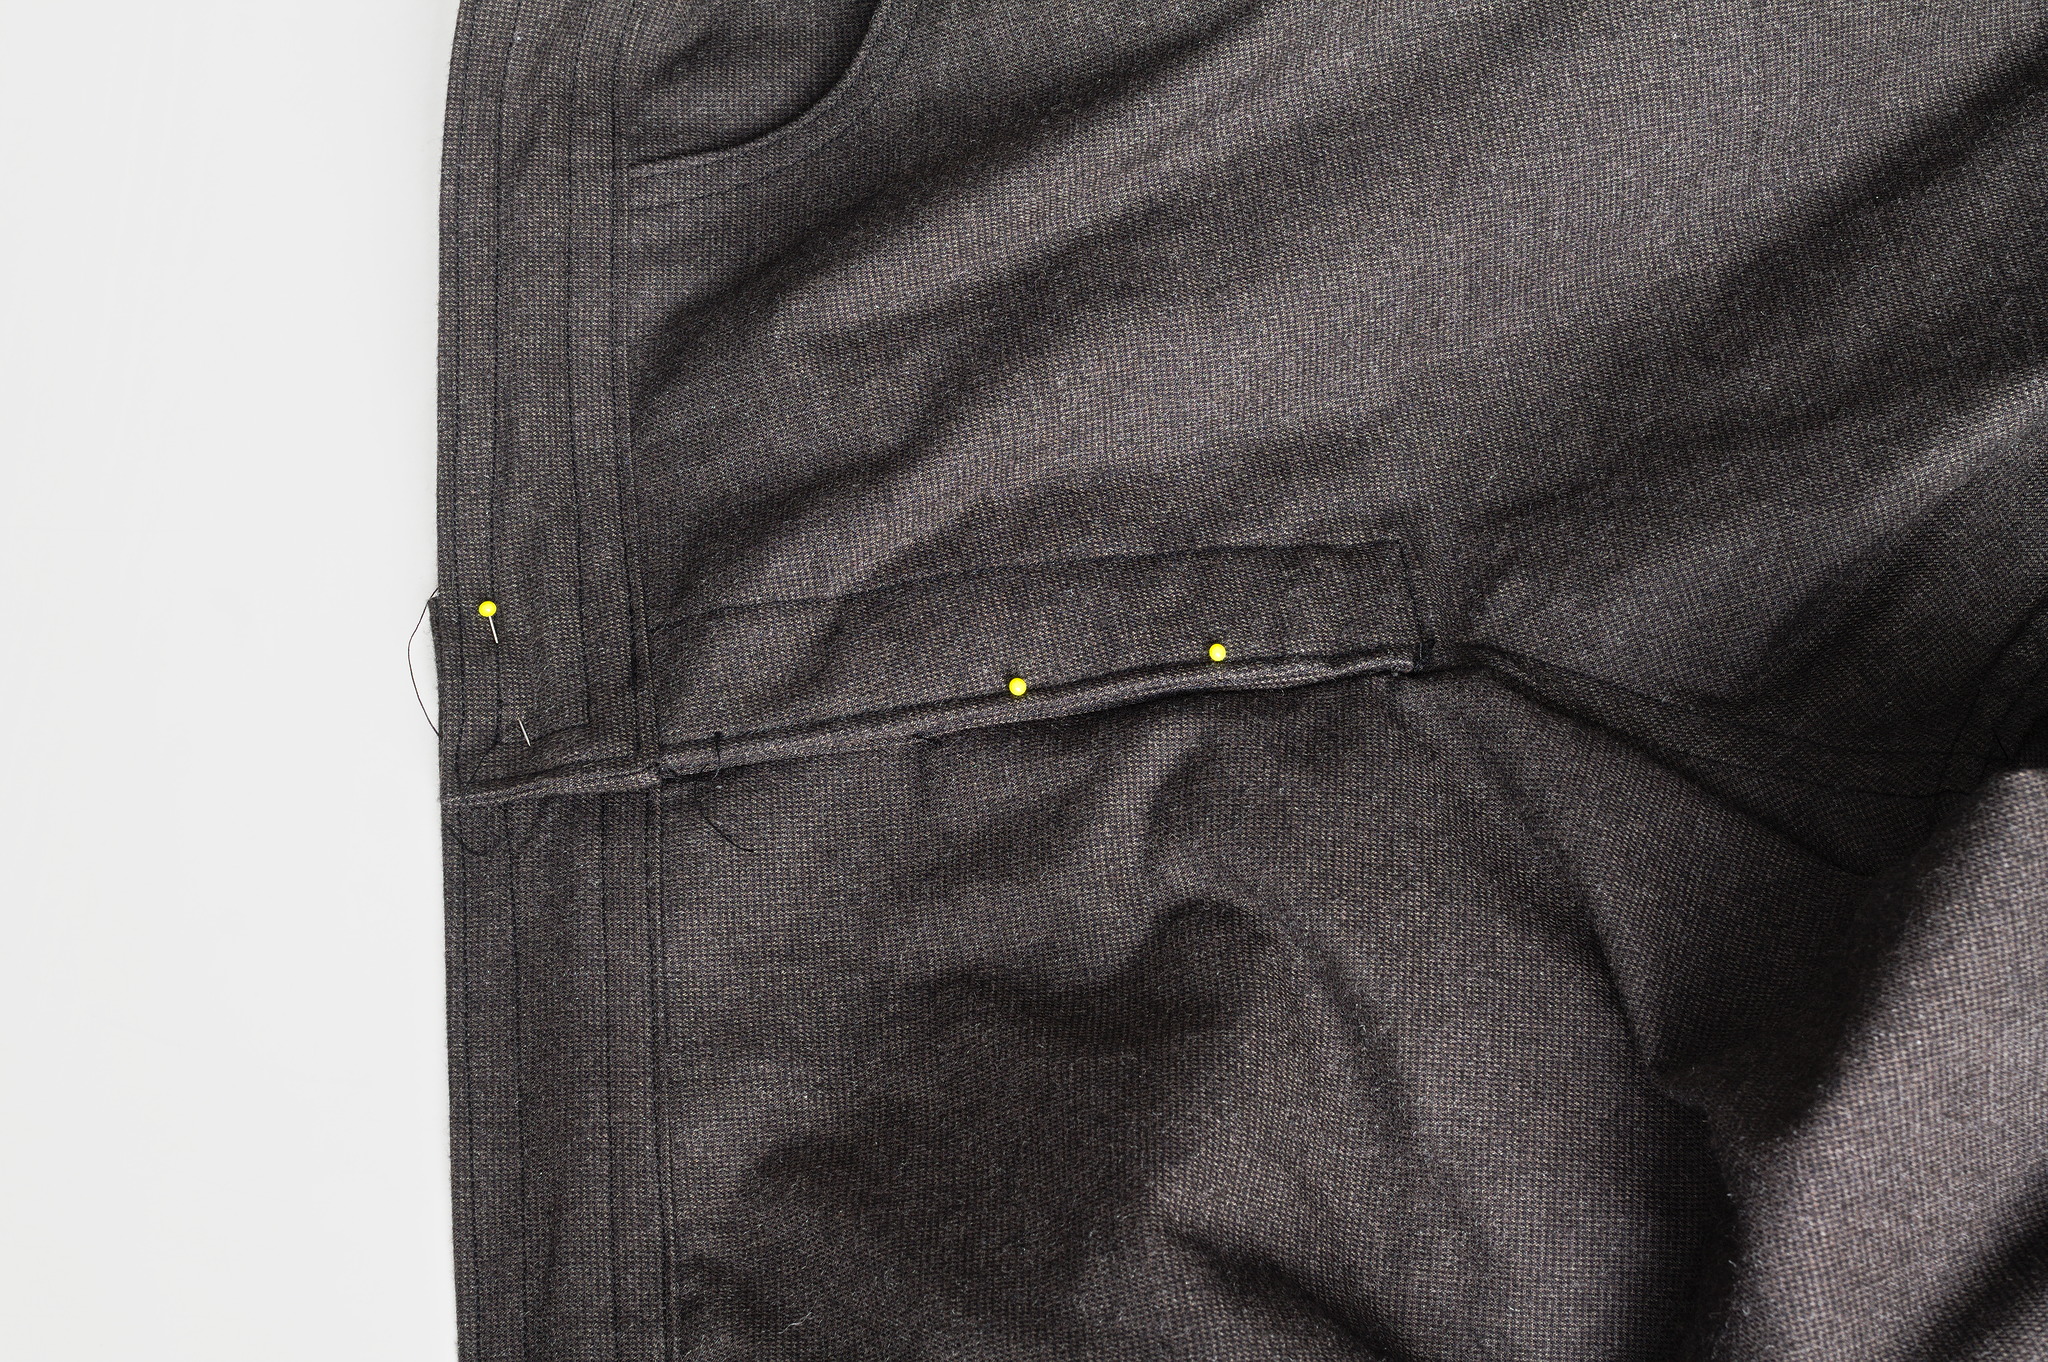 ../../../_images/0602-pinned_placket.jpg